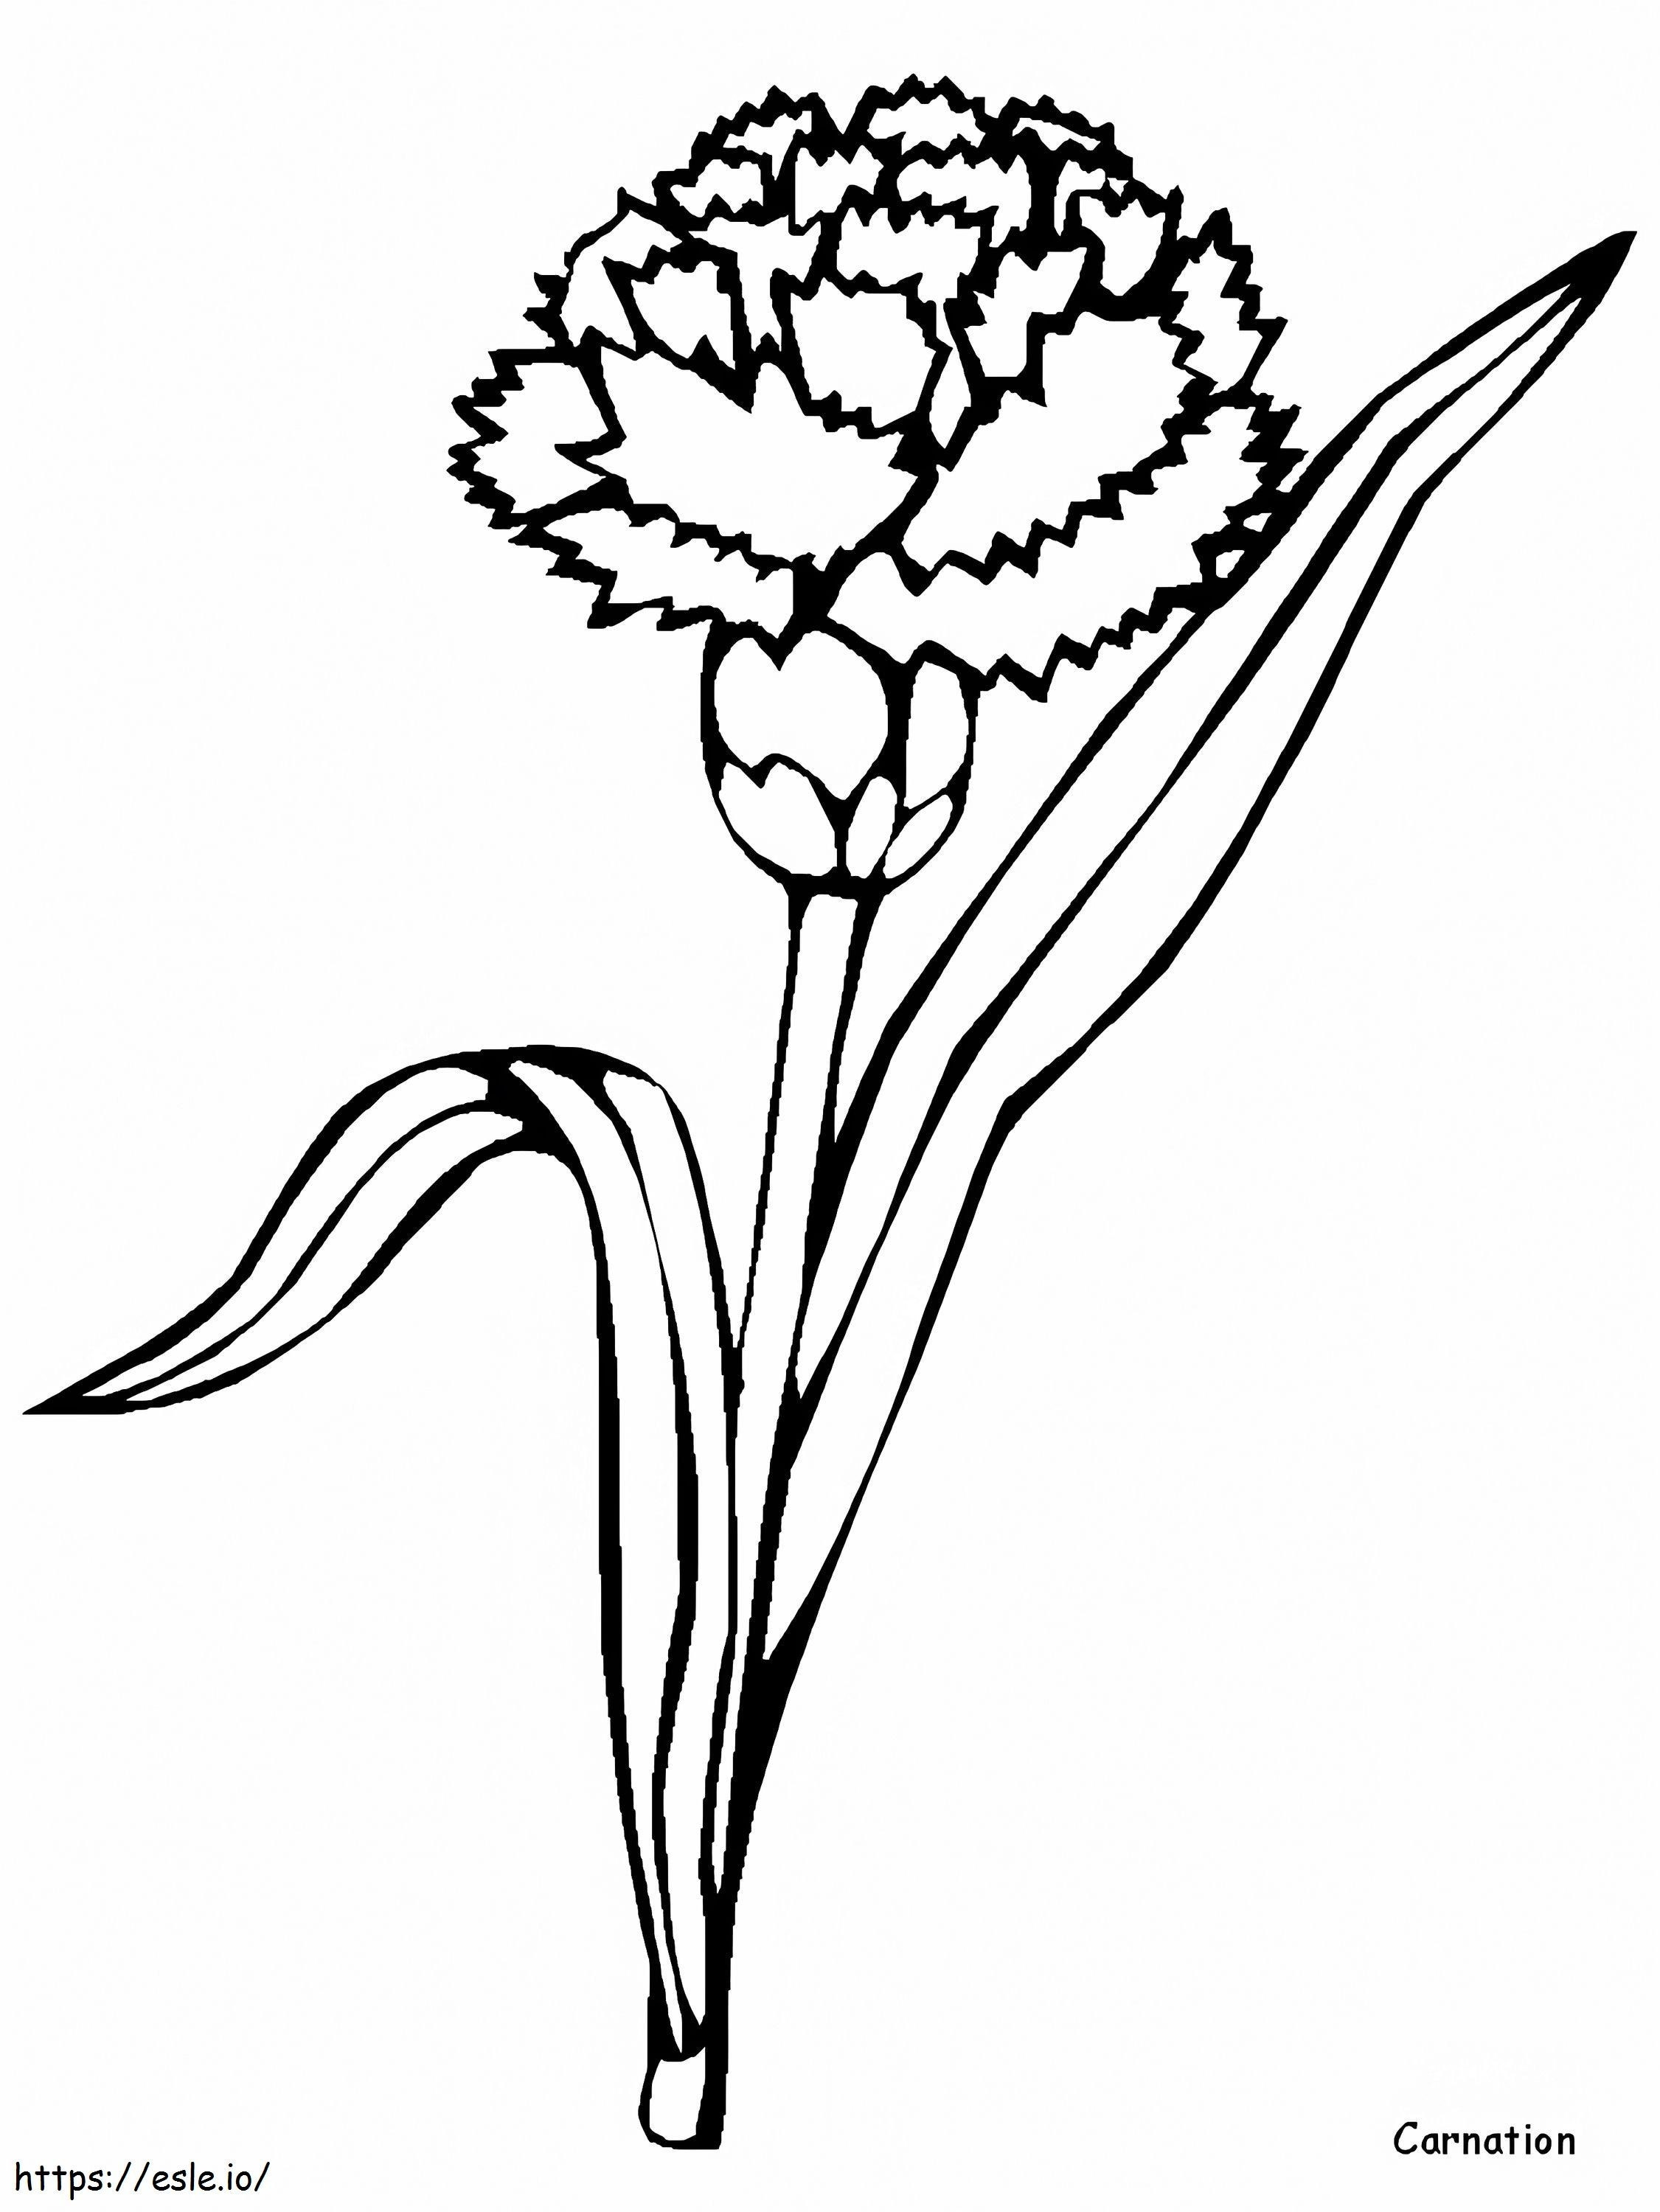 1528167948 Carnation coloring page